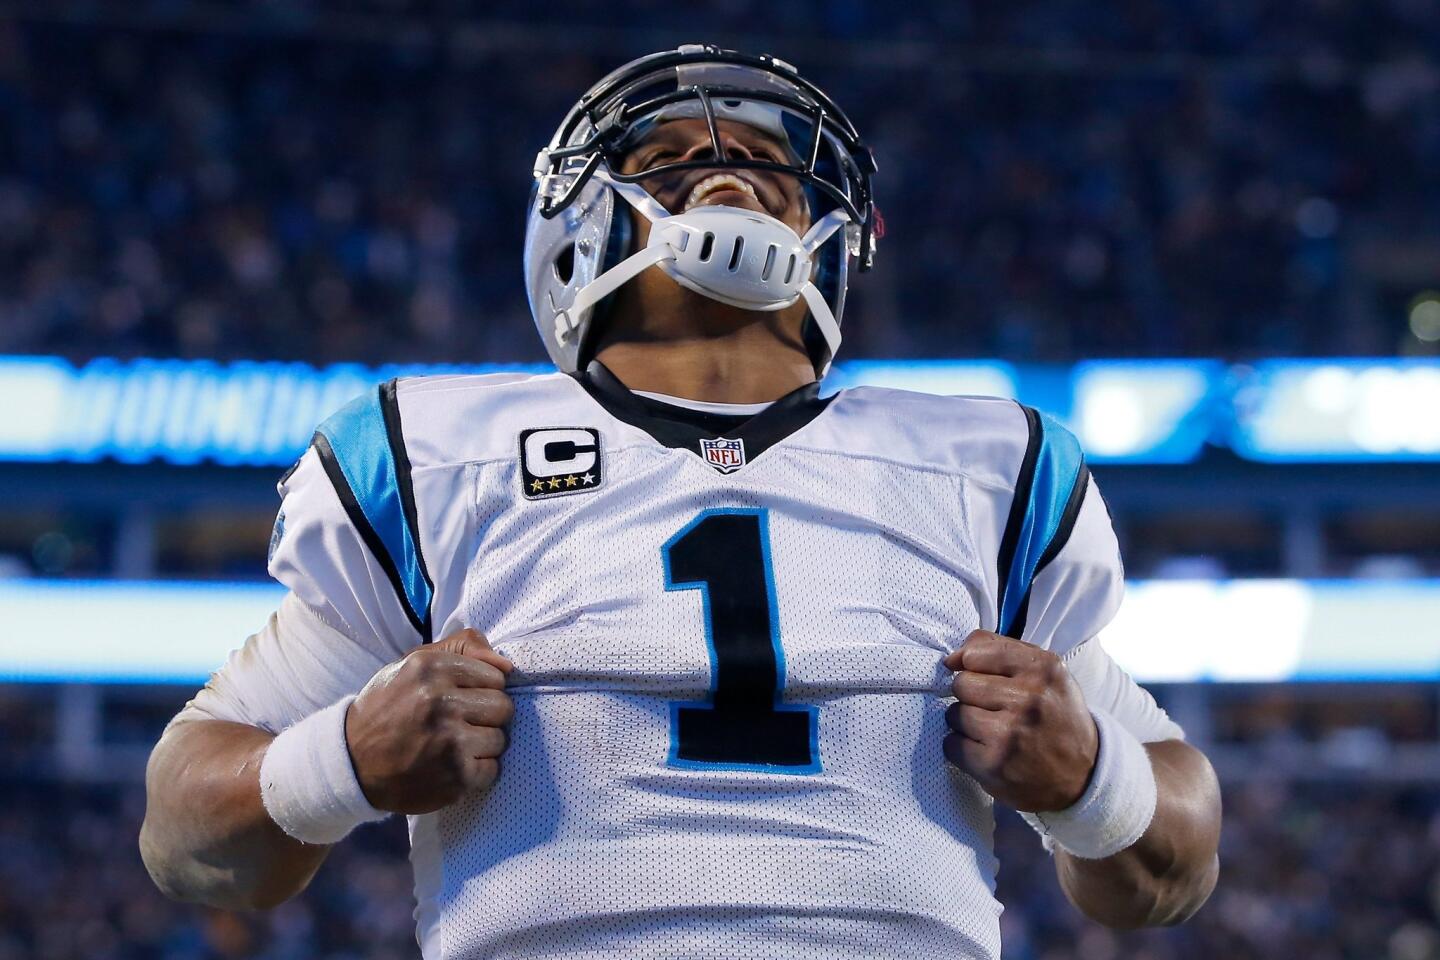 CHARLOTTE, NC - JANUARY 24: Cam Newton #1 of the Carolina Panthers celebrates after scoring a touchdown in the third quarter against the Arizona Cardinals during the NFC Championship Game at Bank of America Stadium on January 24, 2016 in Charlotte, North Carolina. (Photo by Kevin C. Cox/Getty Images) ** OUTS - ELSENT, FPG, CM - OUTS * NM, PH, VA if sourced by CT, LA or MoD **